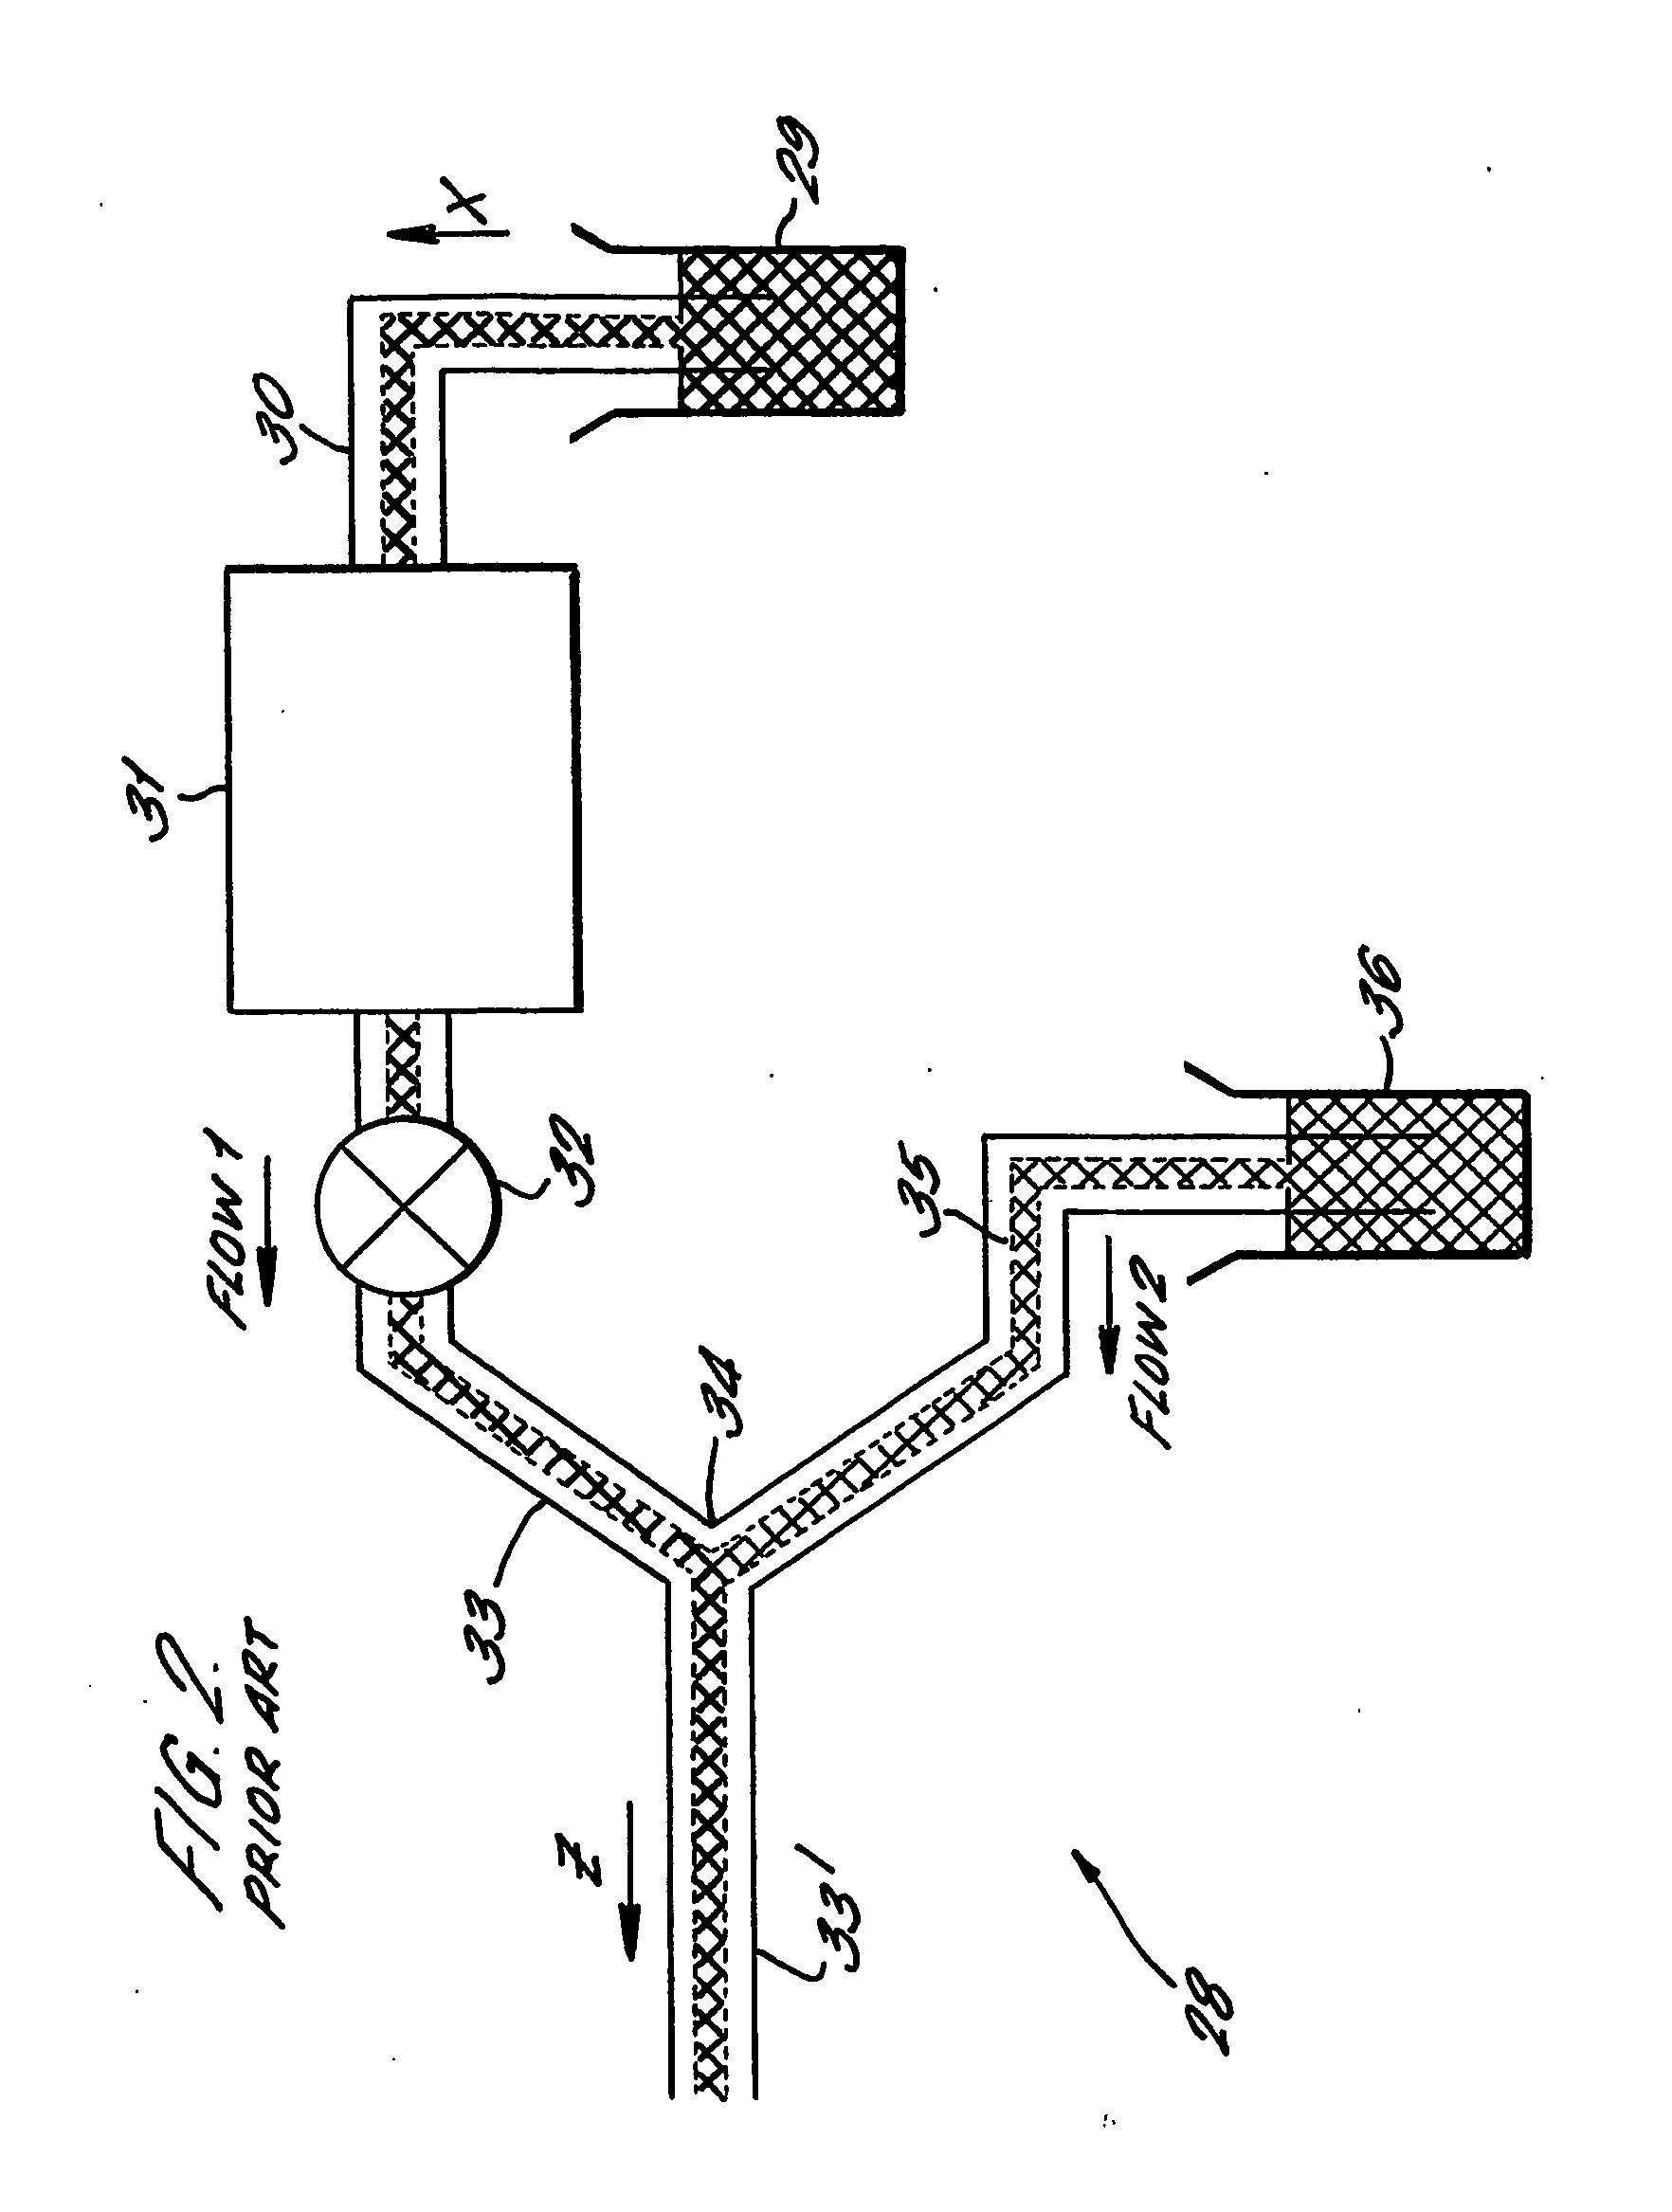 Method and apparatus for pumping and diluting a sample